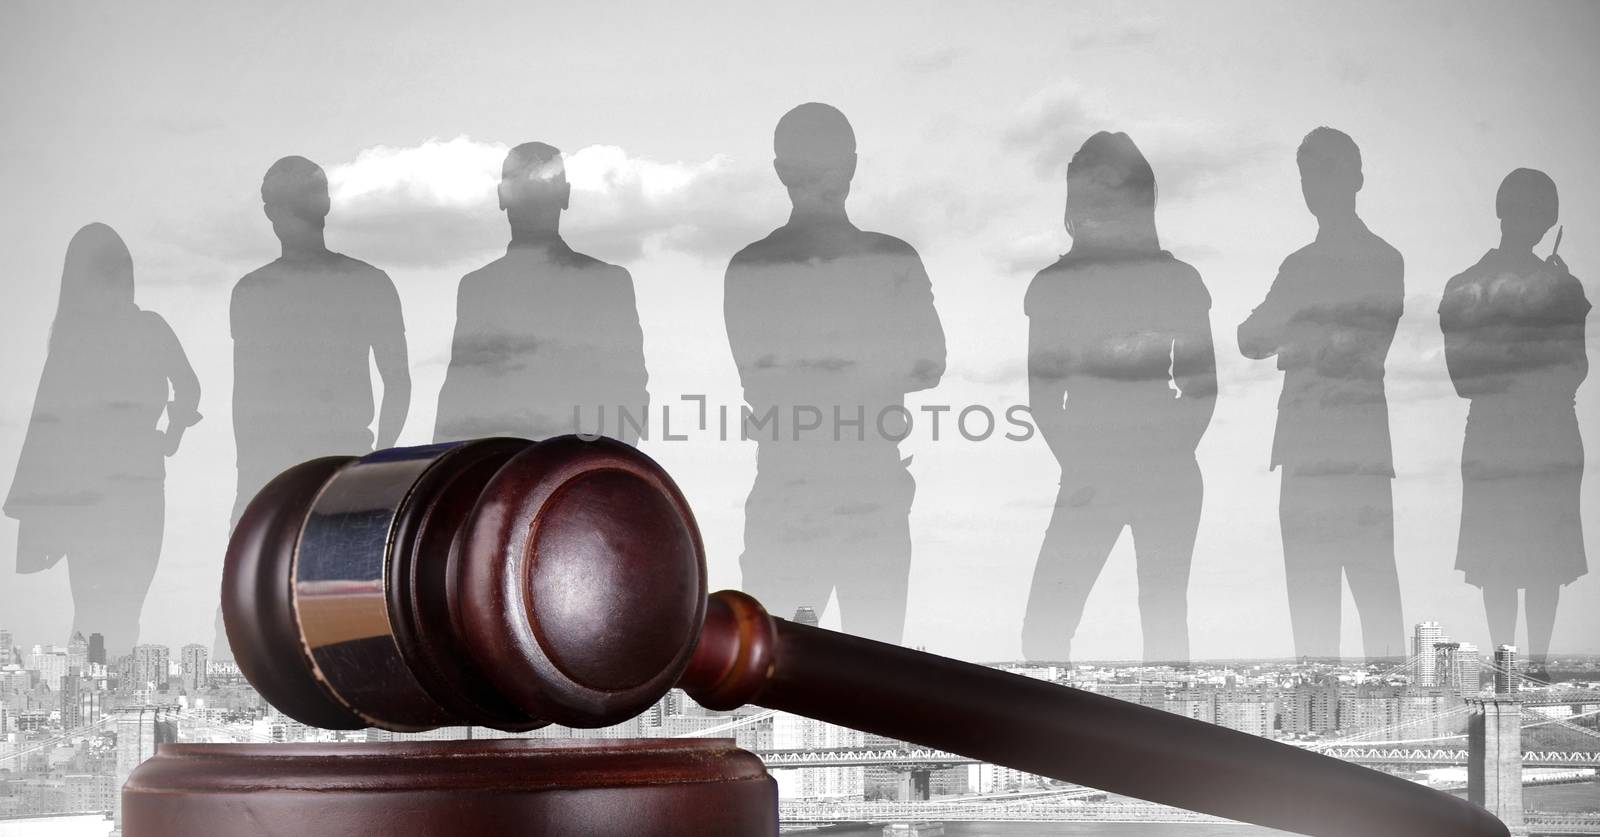 Gavel and people silhouettes over city by Wavebreakmedia